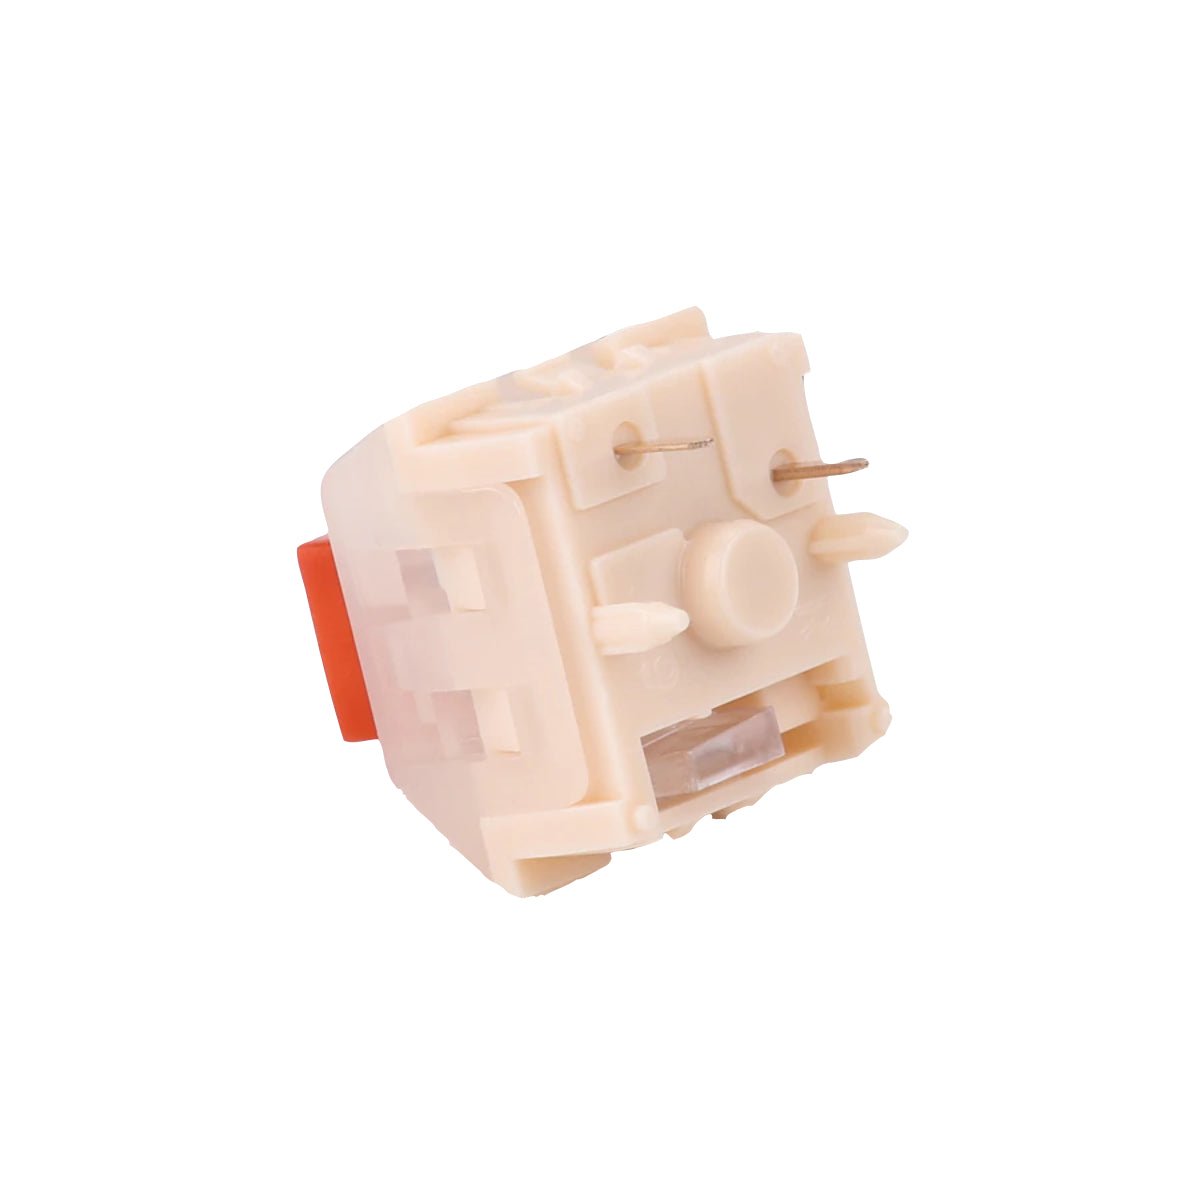 KBD Fans Kailh Box Pudding Linear Switches - Red Bean - Store 974 | ستور ٩٧٤